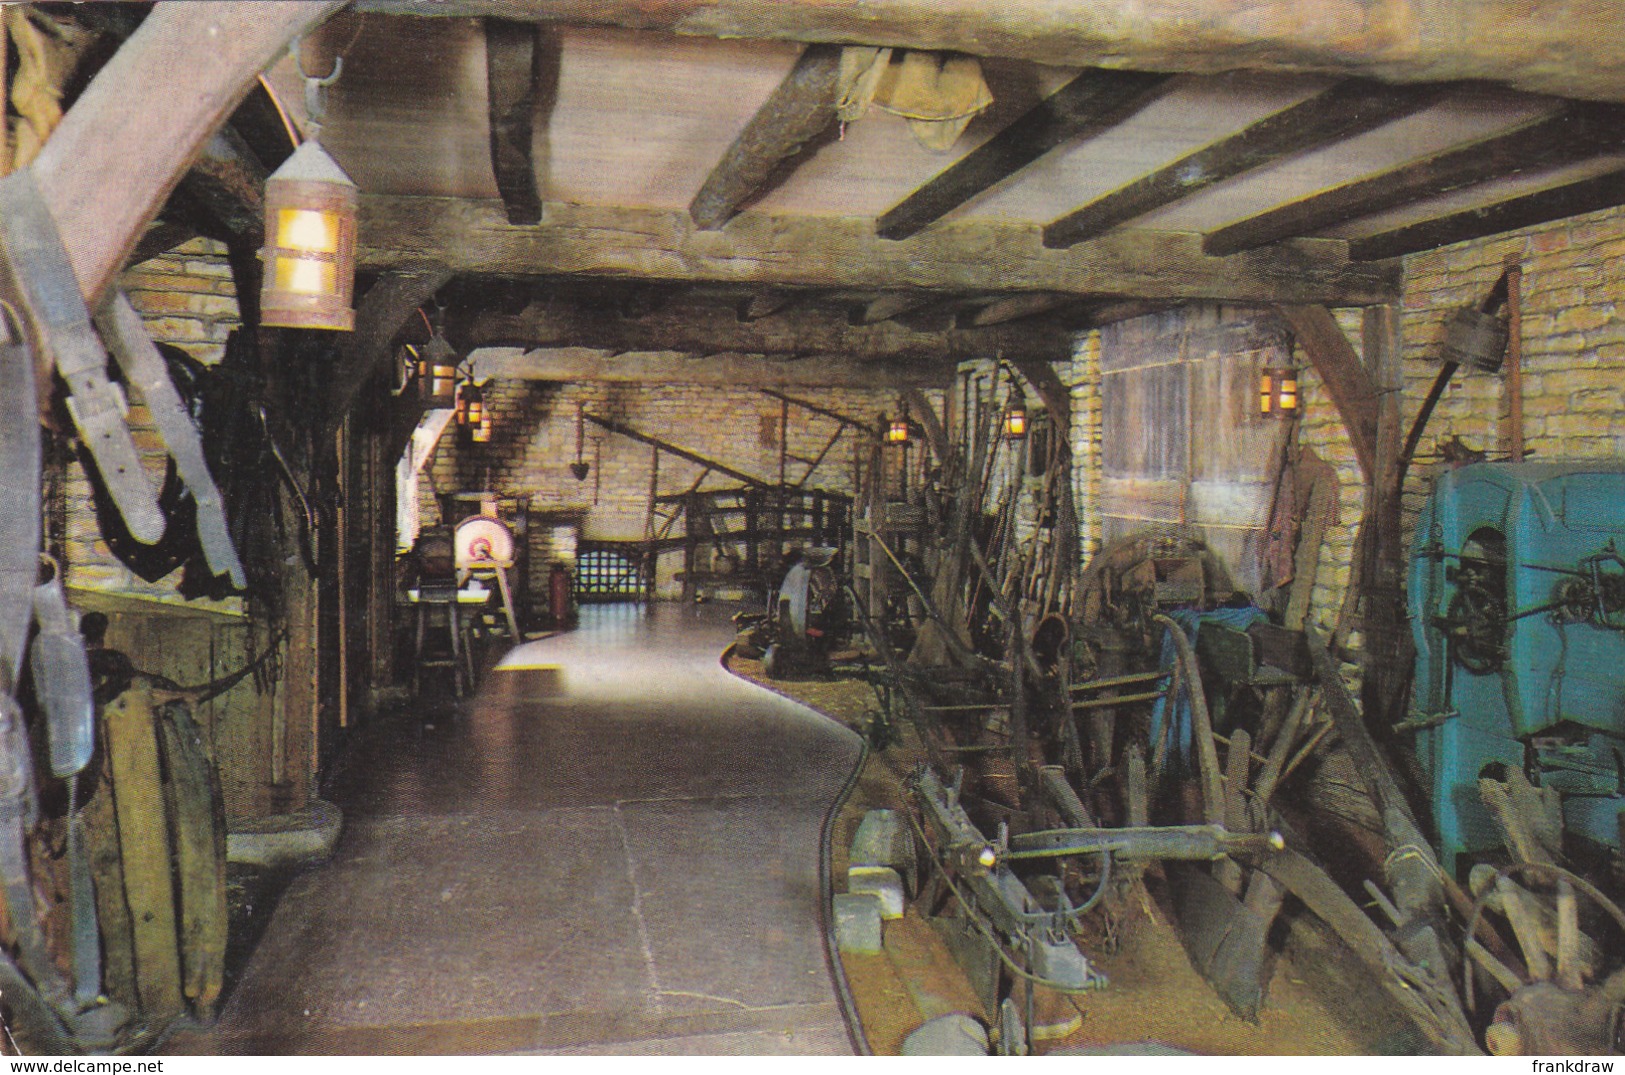 Postcard - Castle Museum, York - The Barn - Card No. R854 - VG - Unclassified